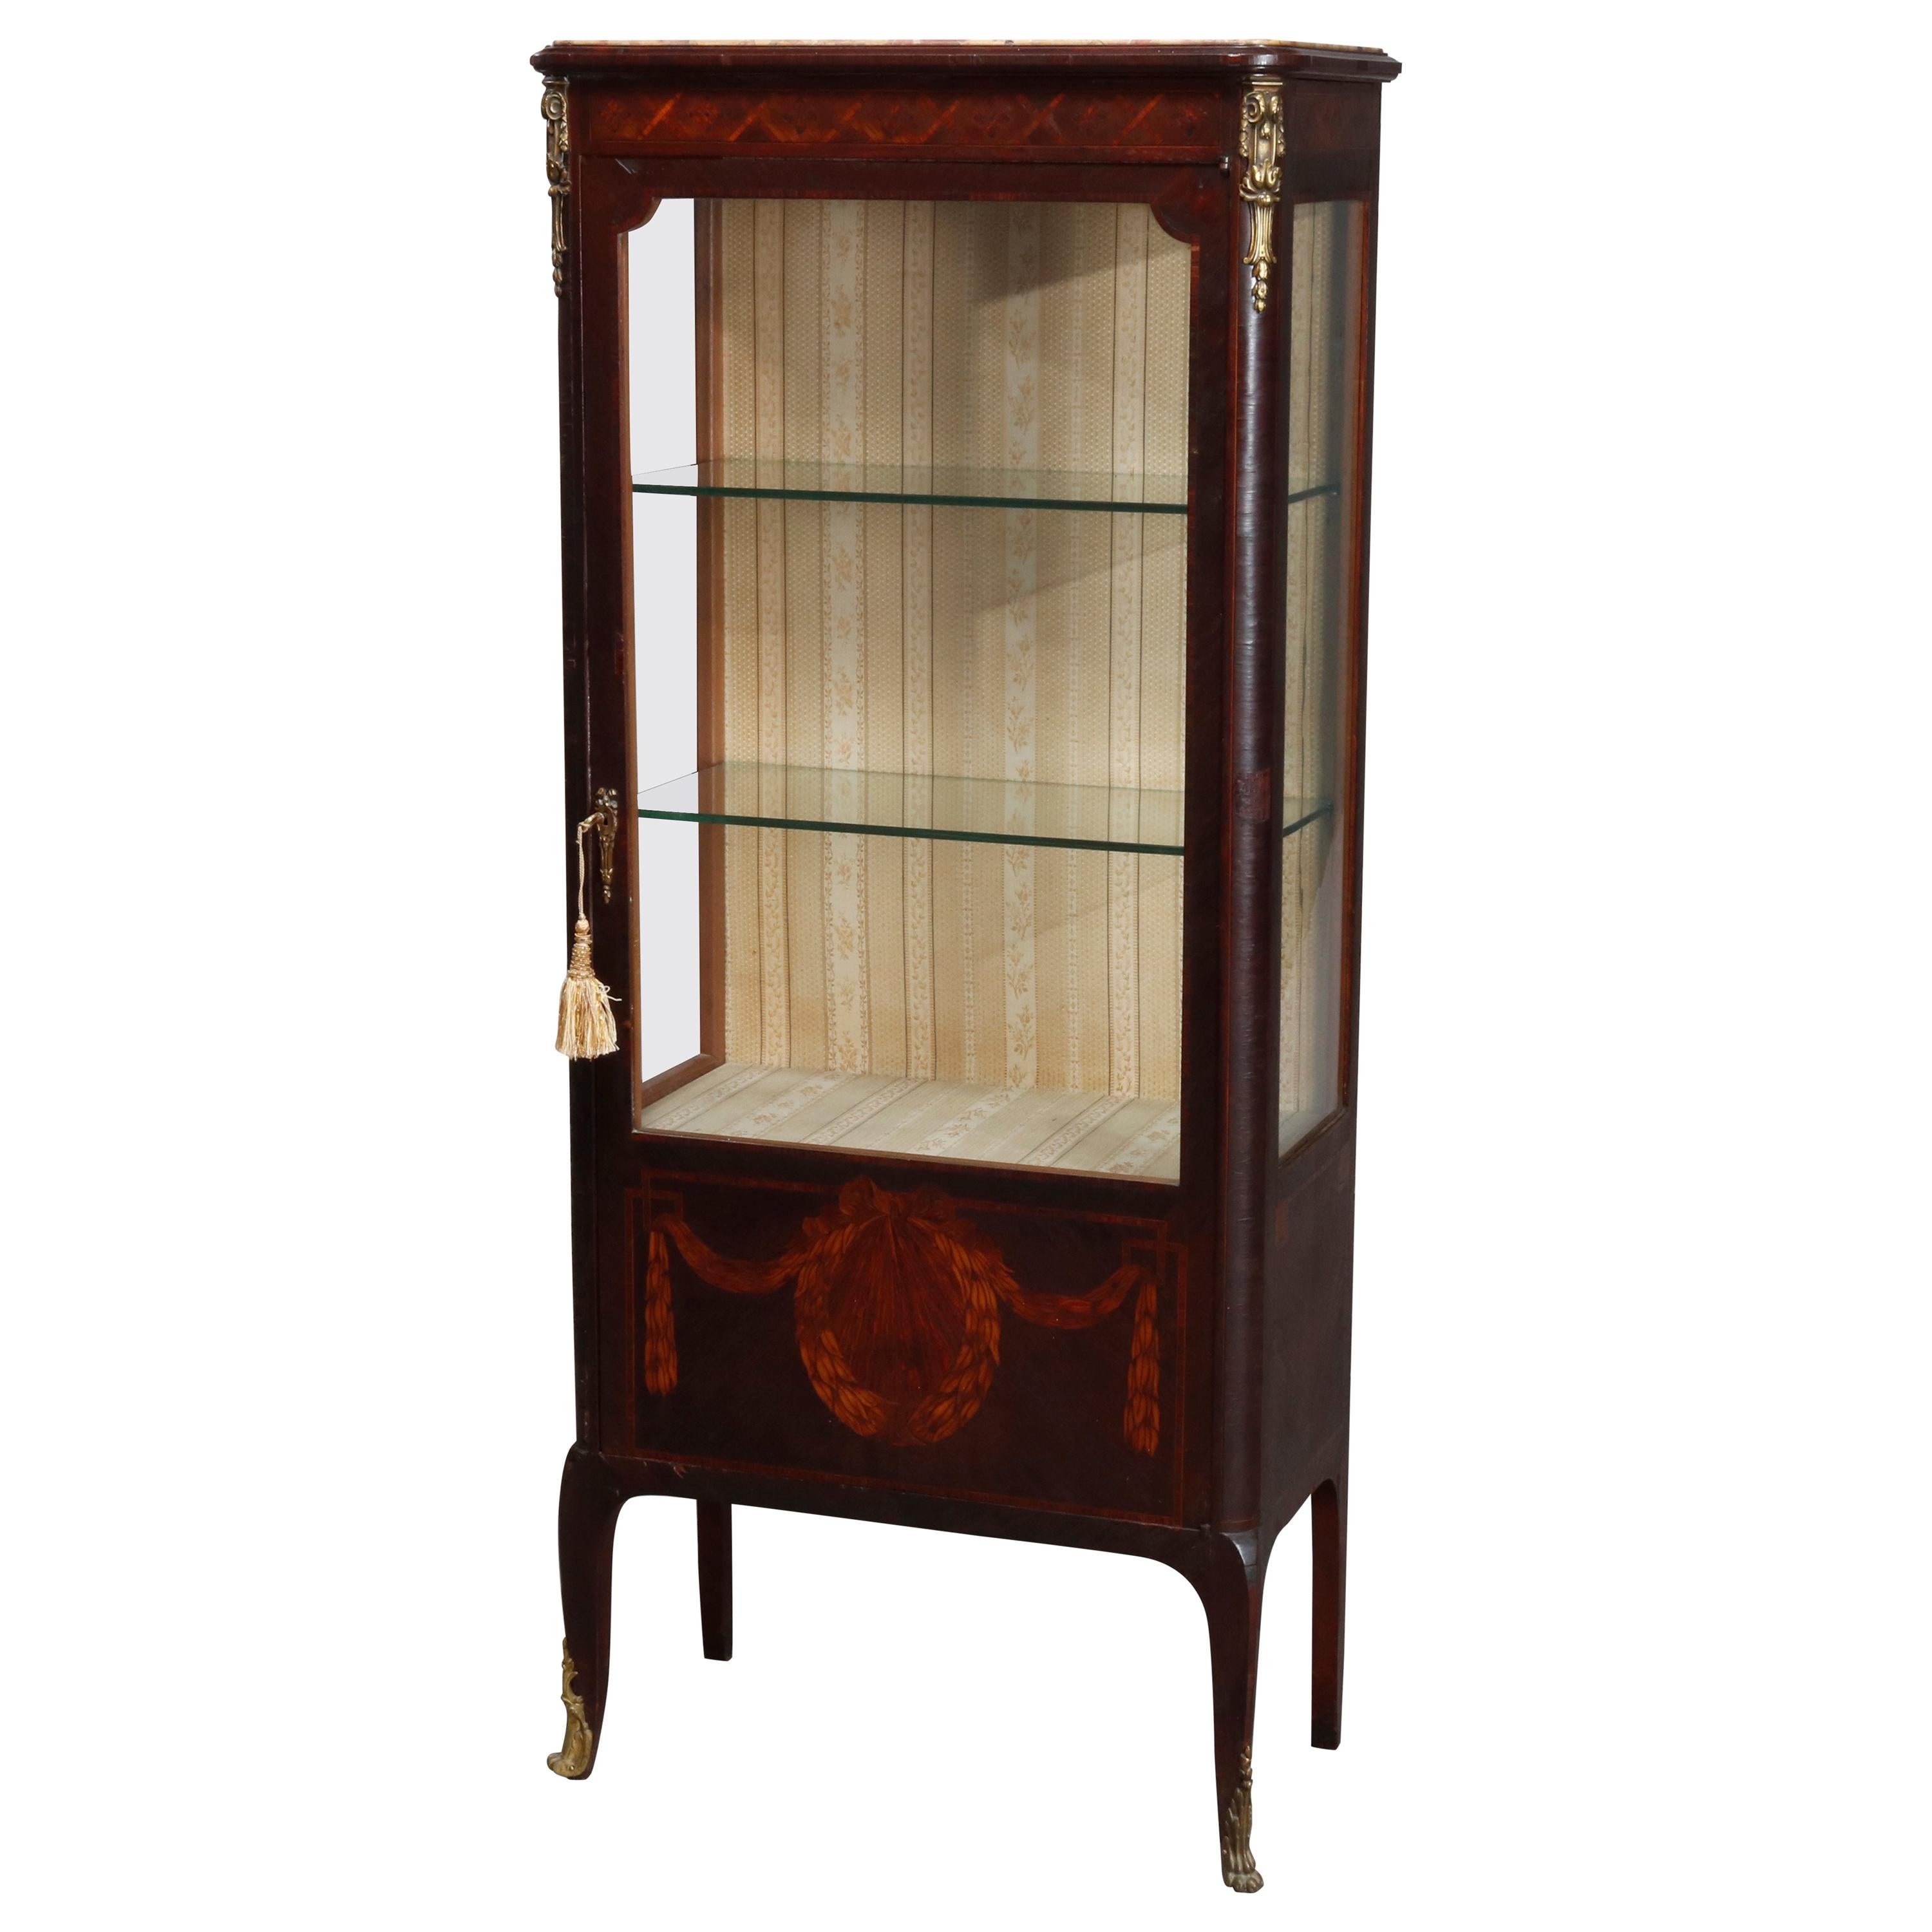 Antique French Louis XV Style Marquetry and Ormolu Decorated Vitrine, circa 1890